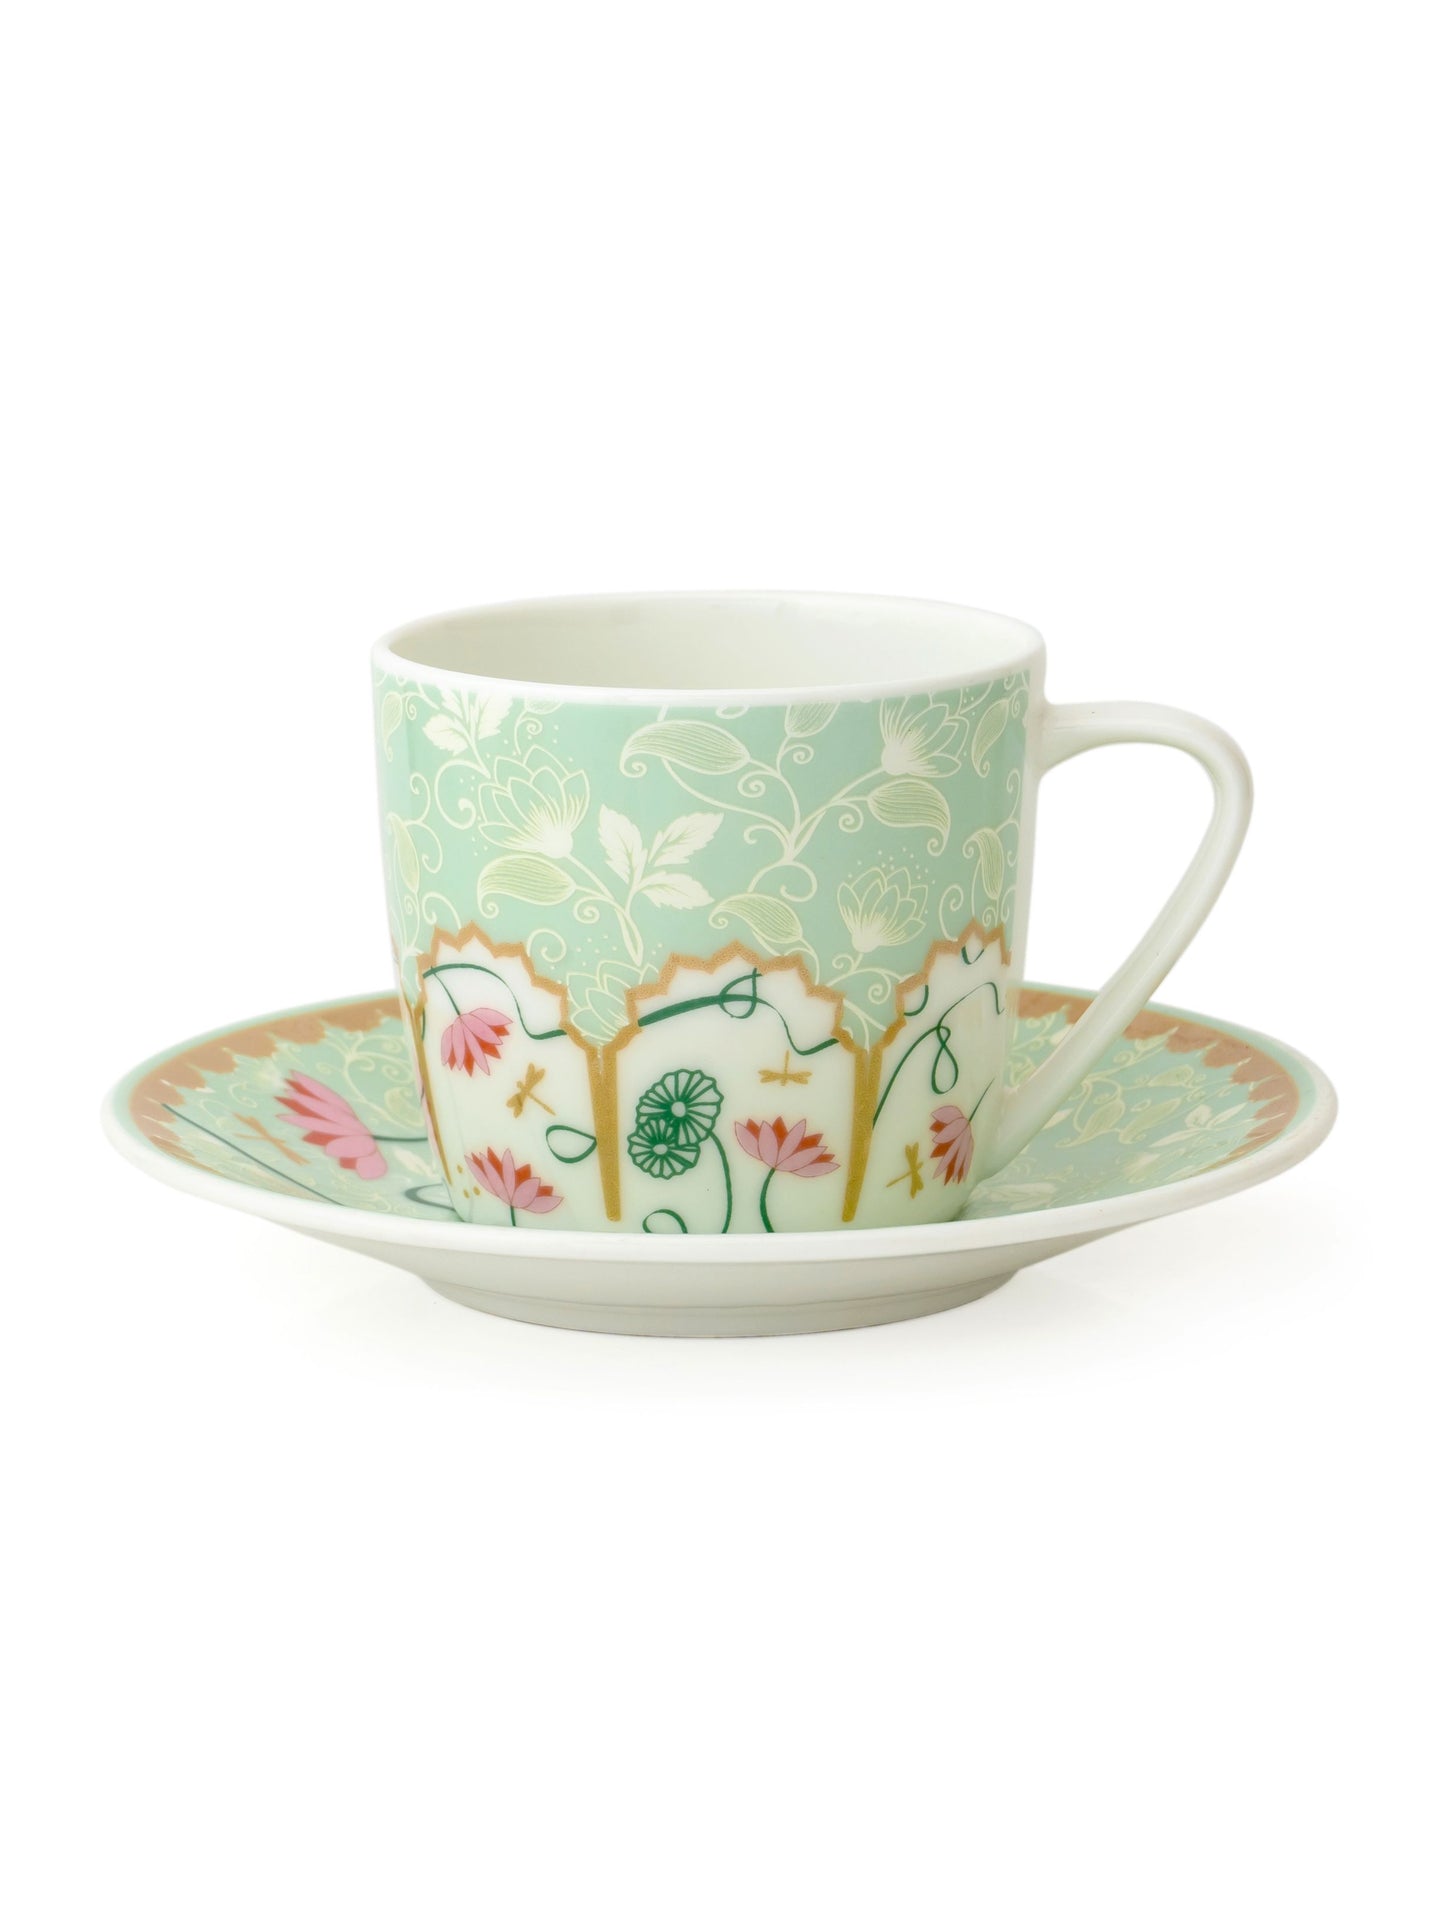 Cheers Super Cup & Saucer, 170 ml, Set of 12 (6 Cups + 6 Saucers) (S387)